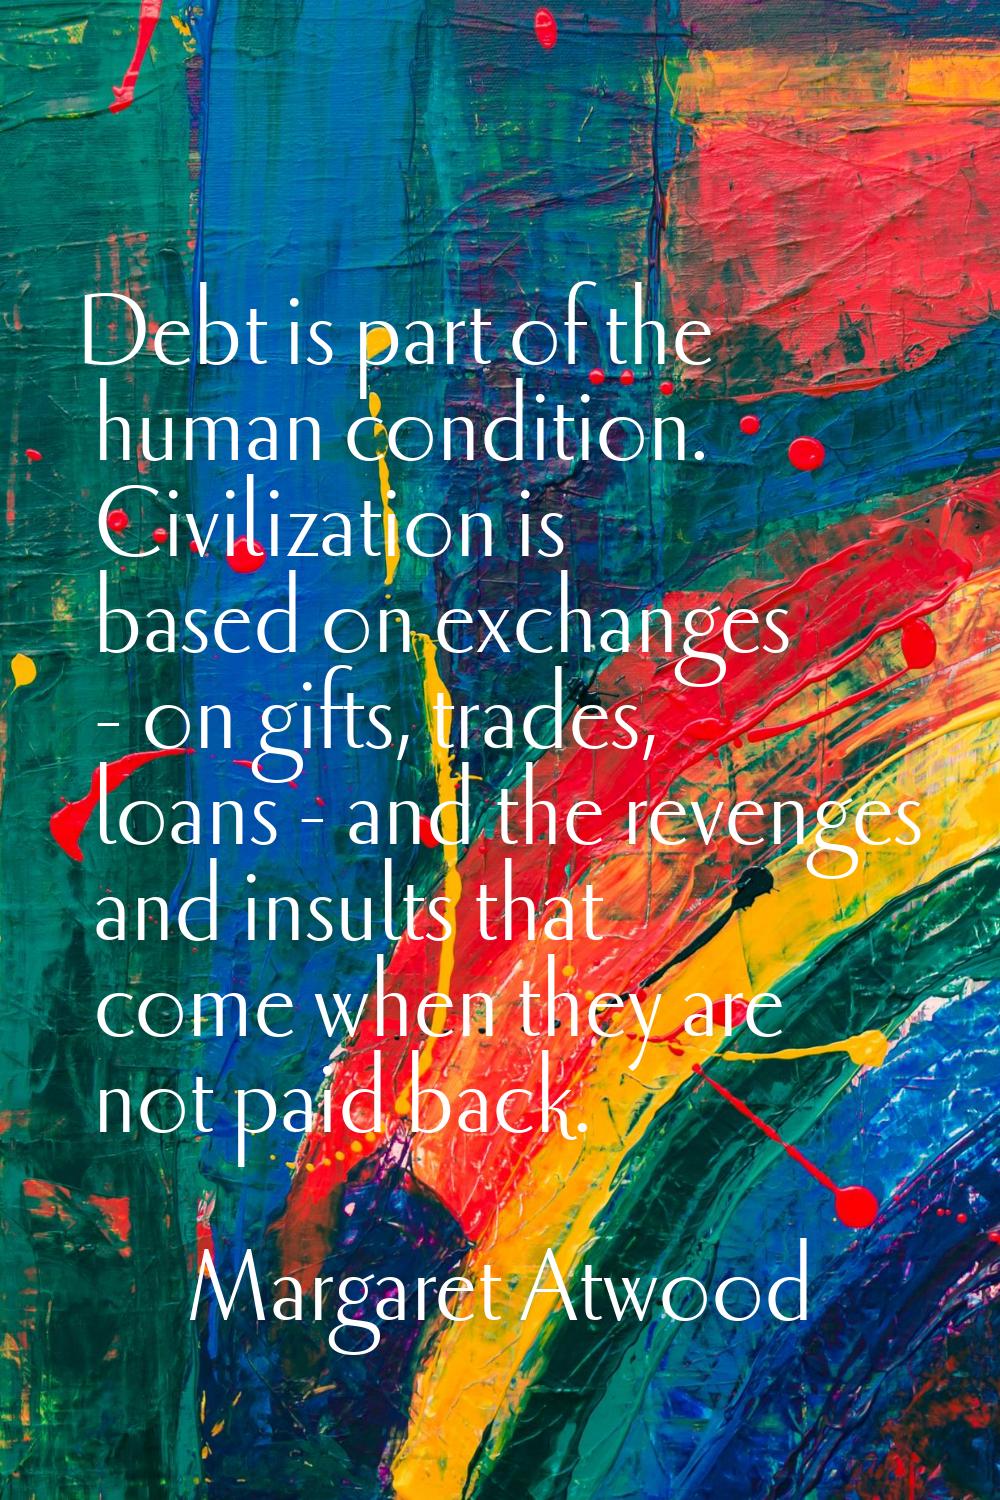 Debt is part of the human condition. Civilization is based on exchanges - on gifts, trades, loans -